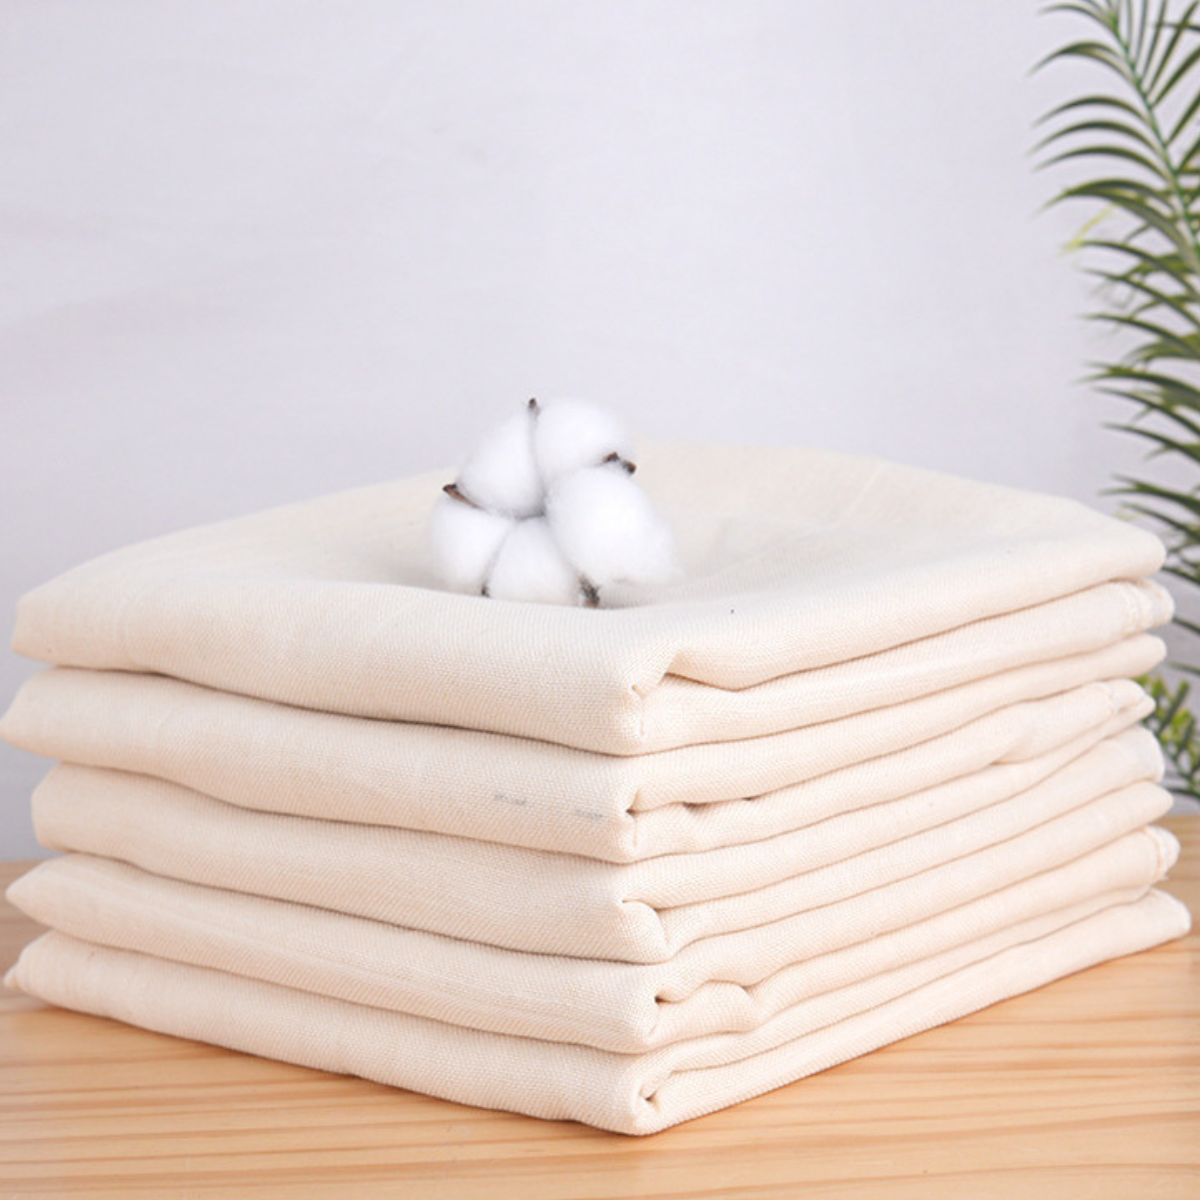 Large Reusable Grade 90 Cotton Cheesecloth for Cooking (8 PC)